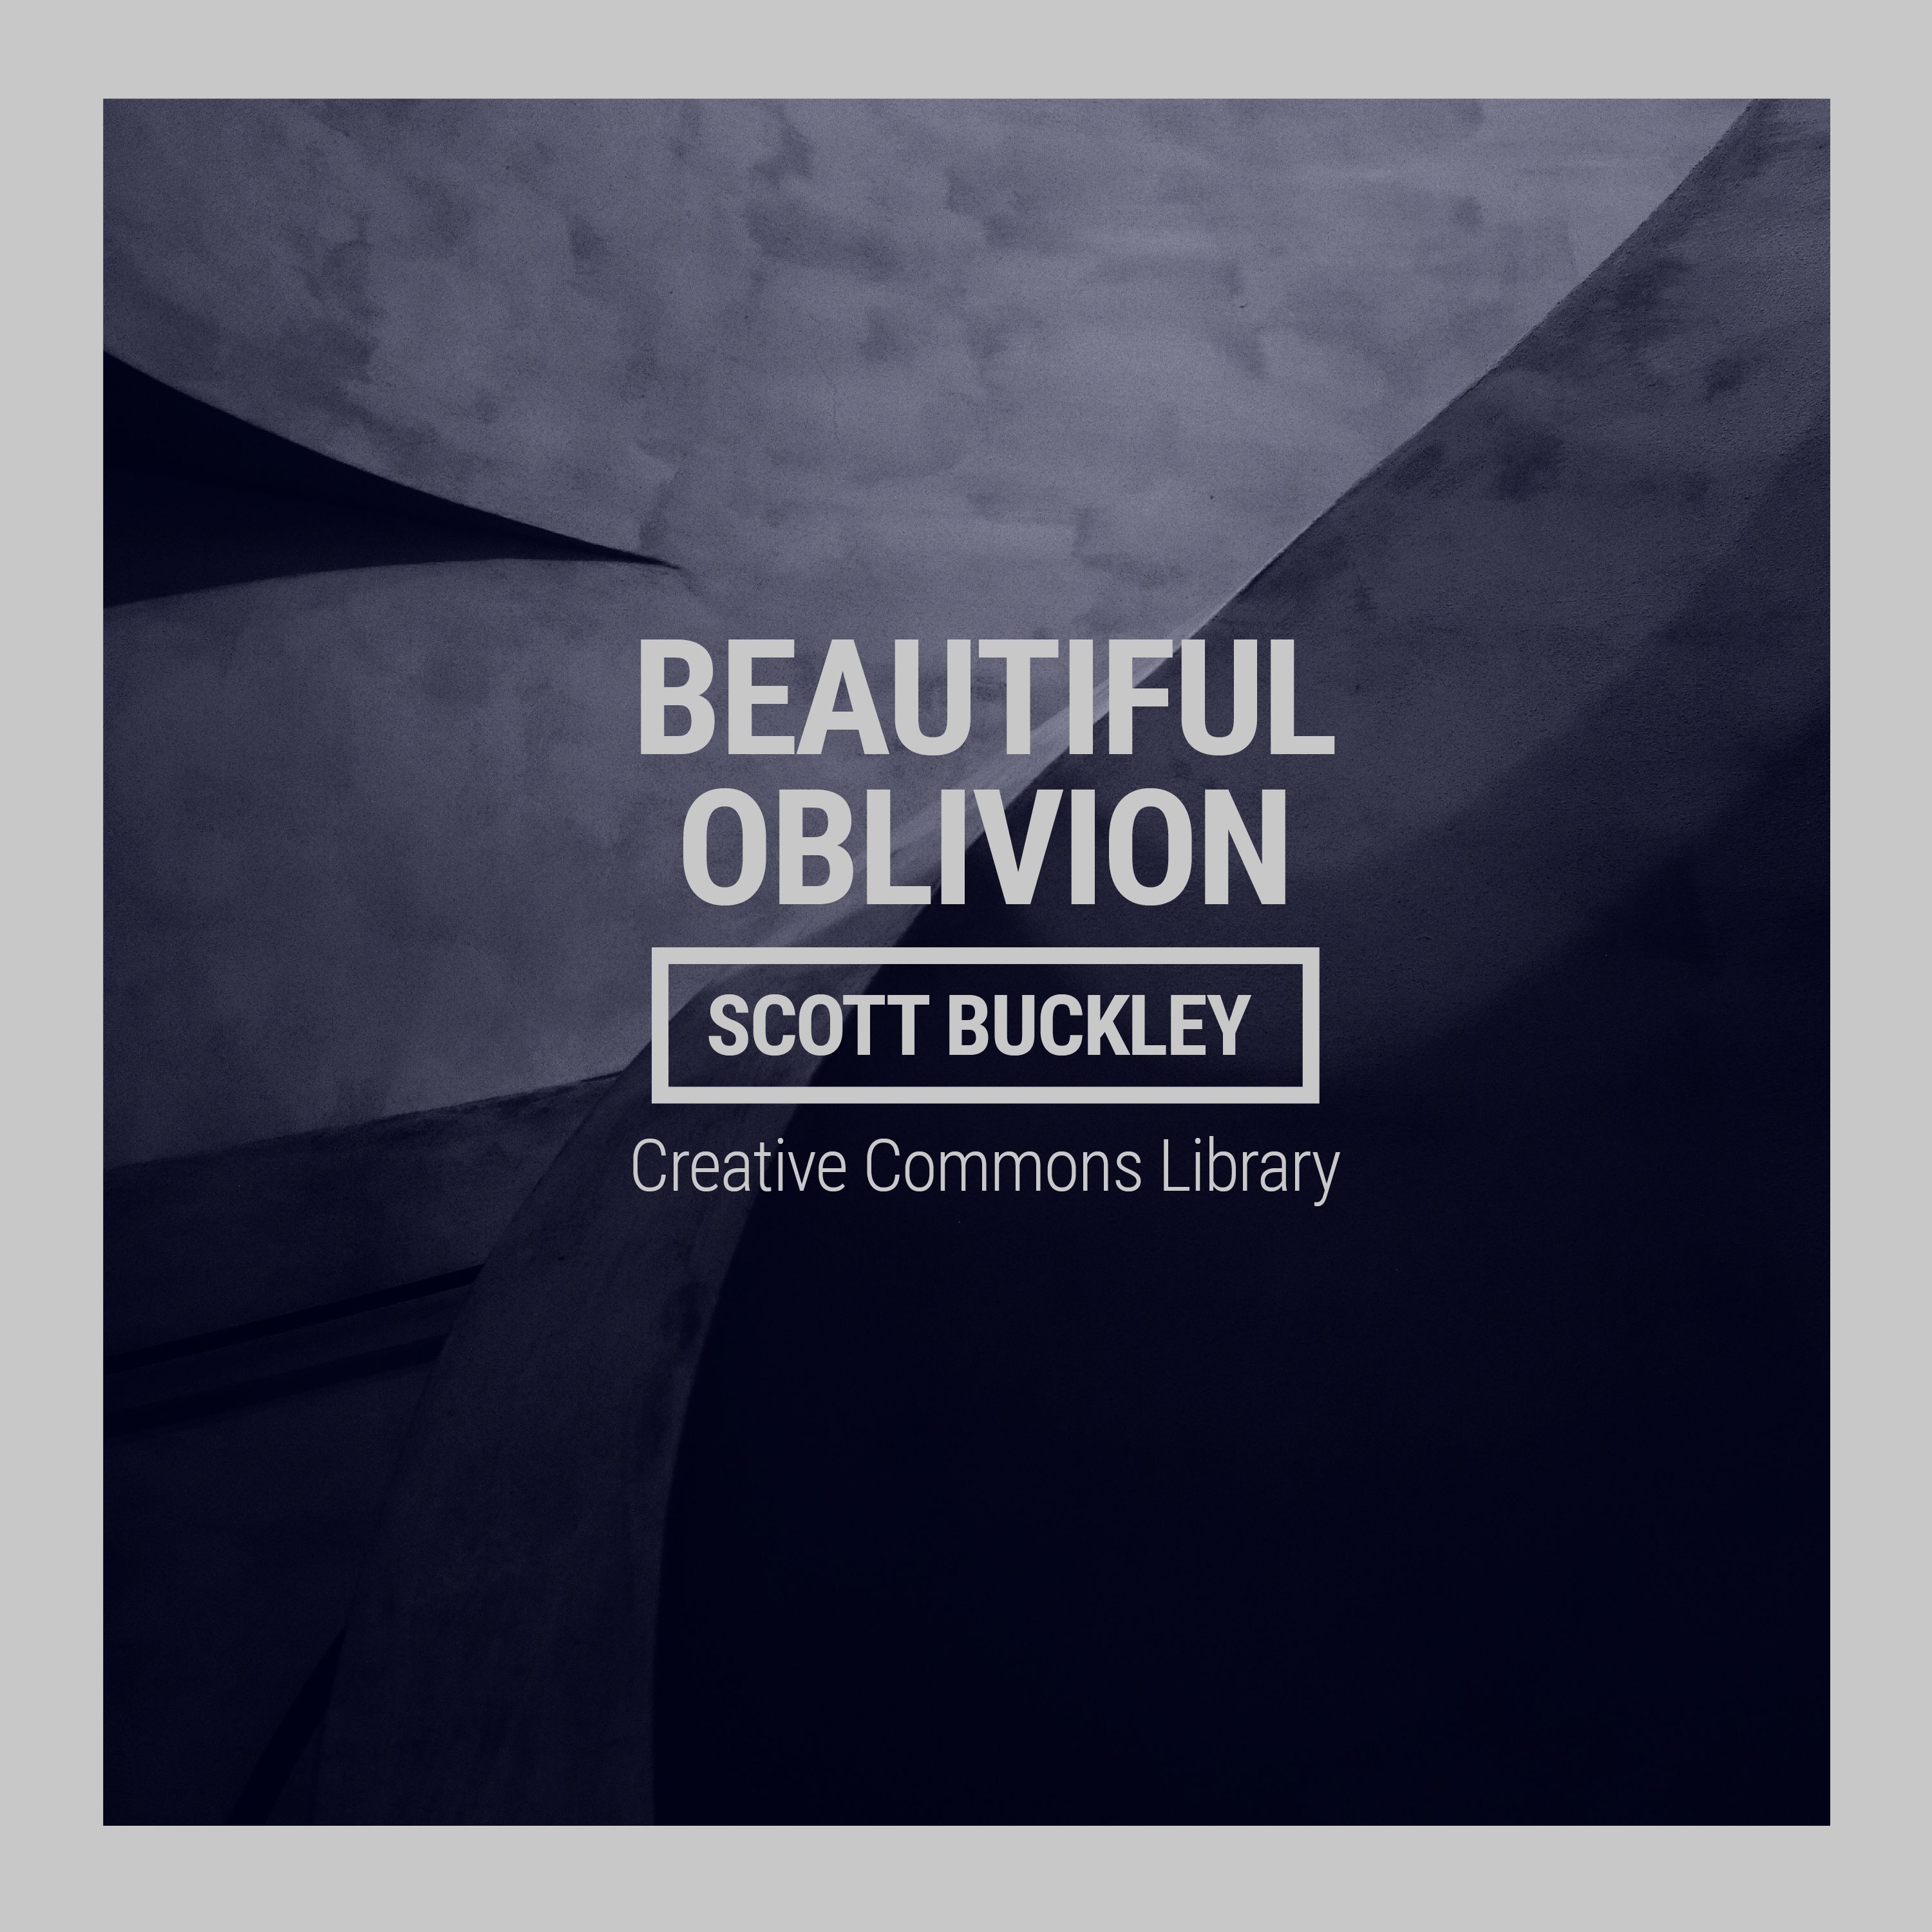 Download Beautiful Oblivion (CC-BY)